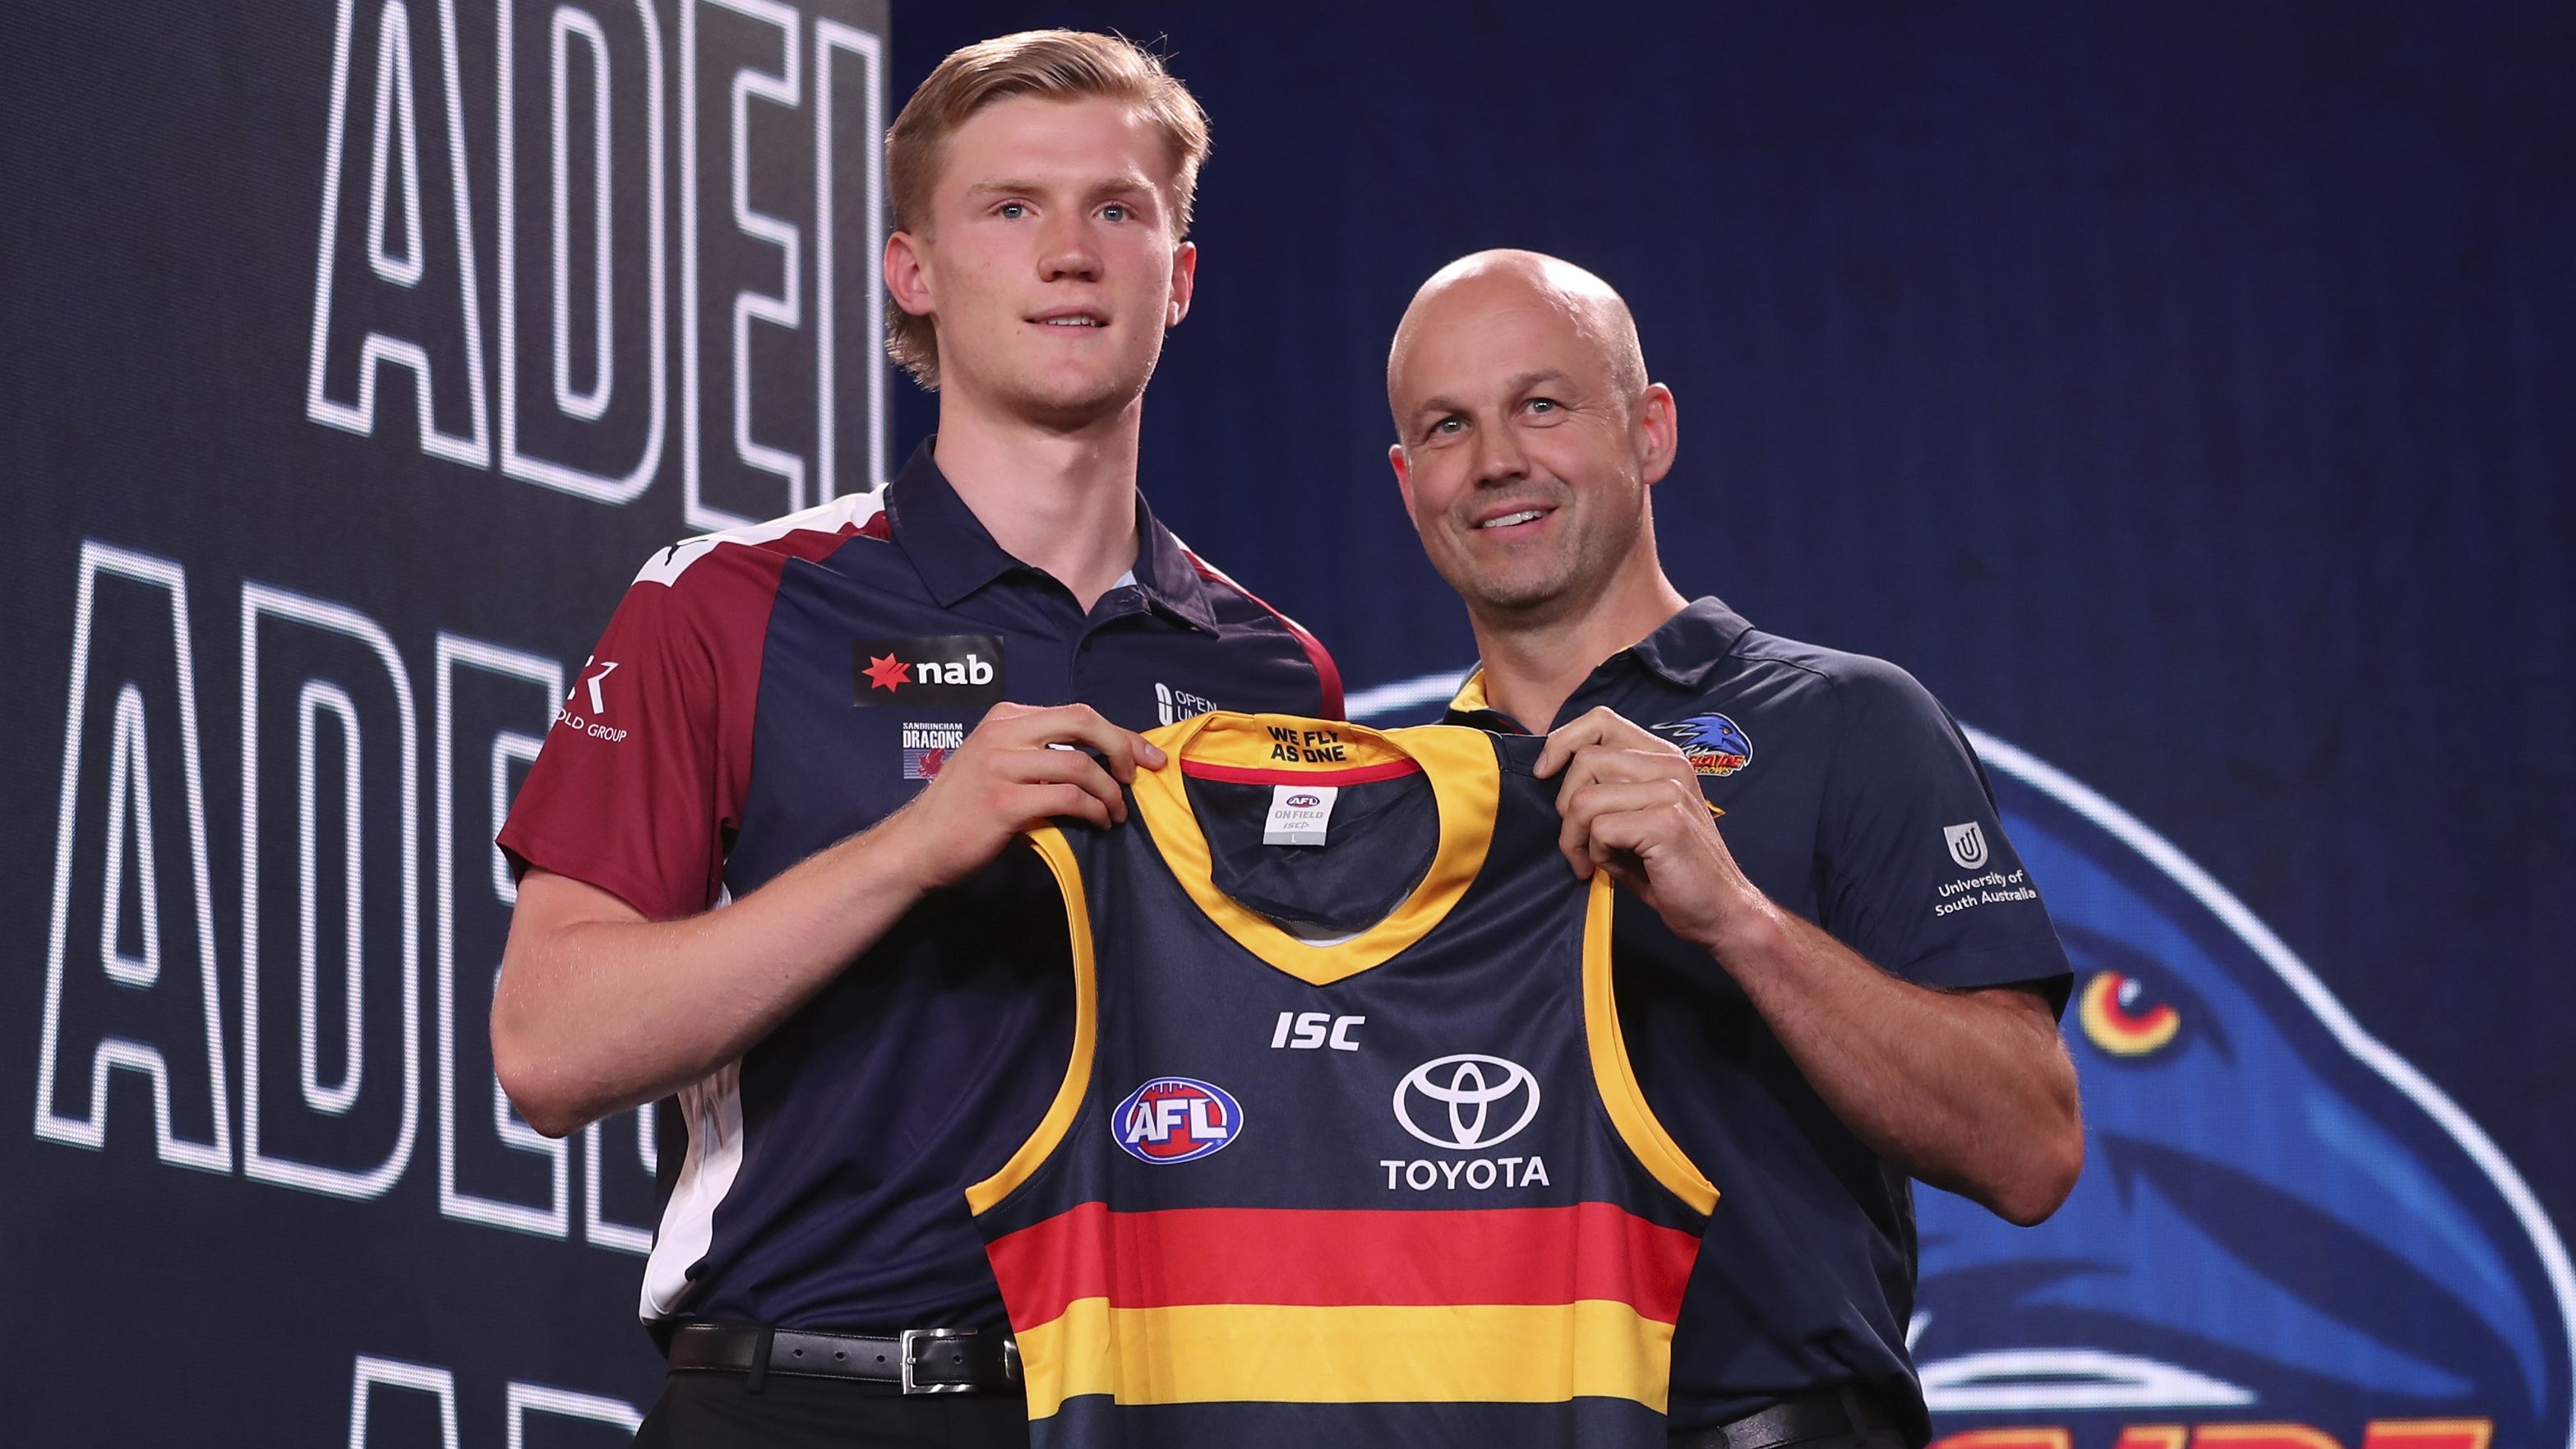 Fischer McAsey poses with Adelaide Crows coach Matthew Nicks during the 2019 AFL draft.